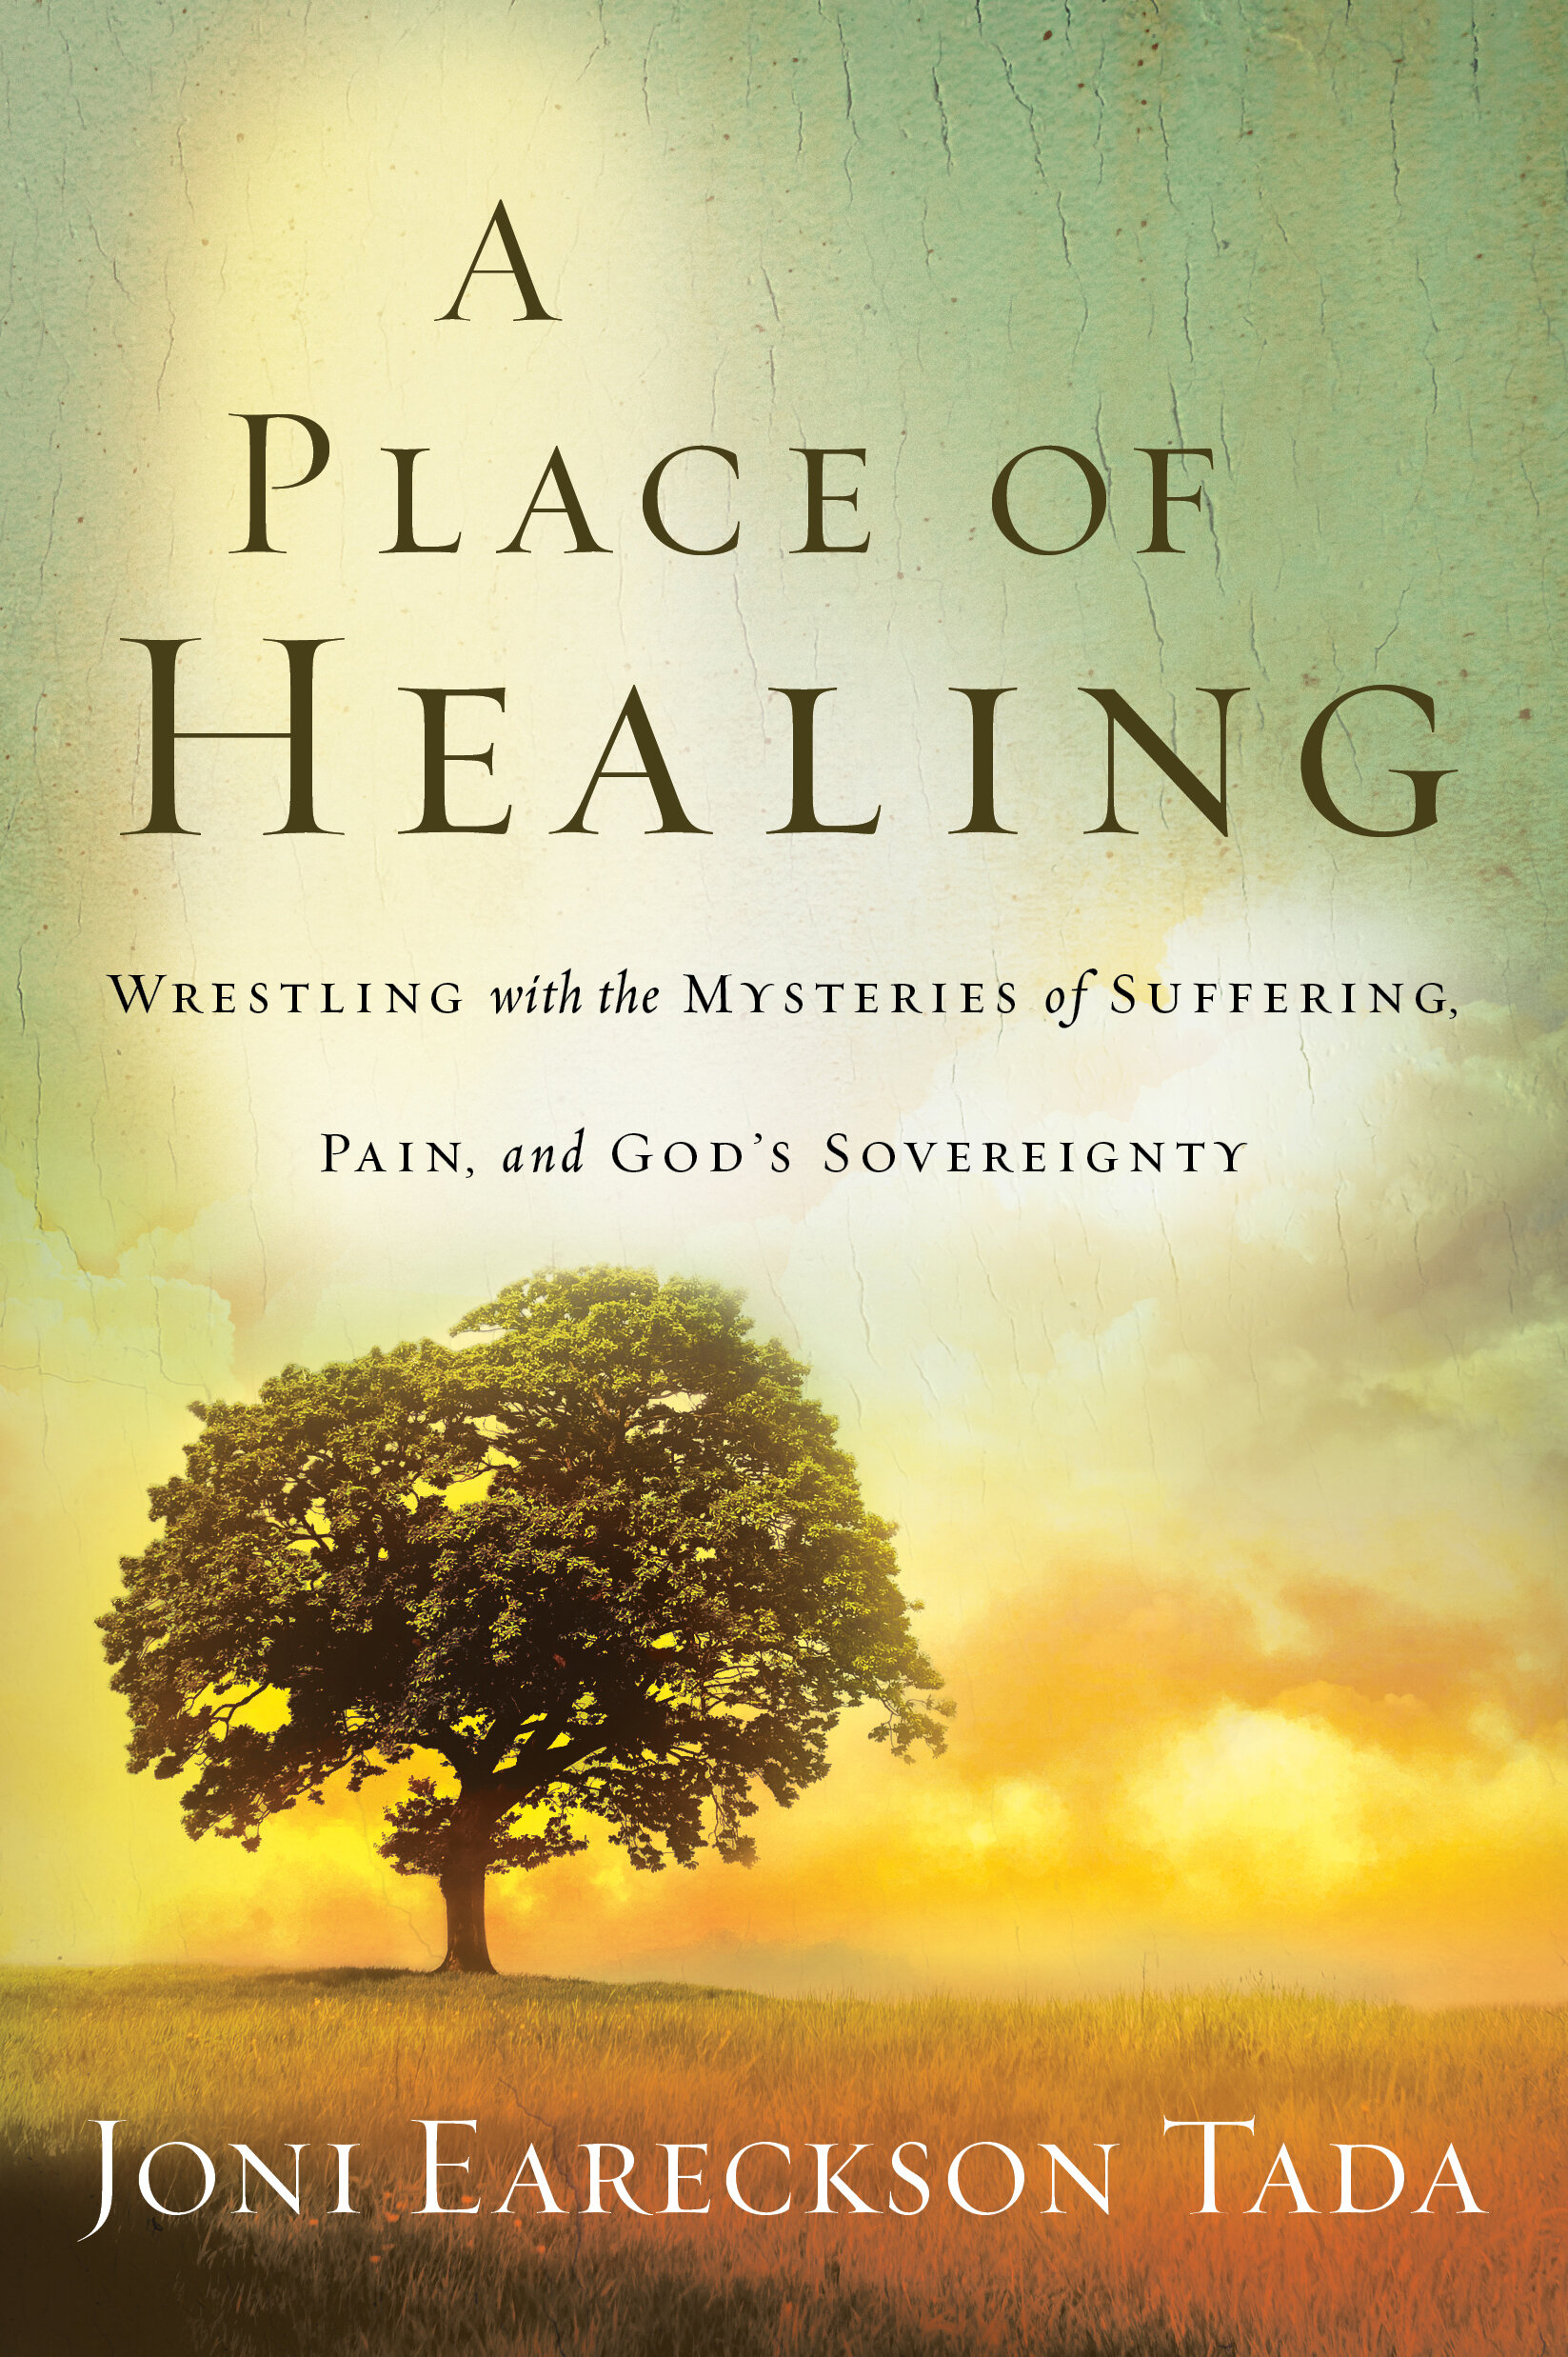 A Place of Healing: Wrestling with the Mysteries of Suffering, Pain, and God's Sovereignty